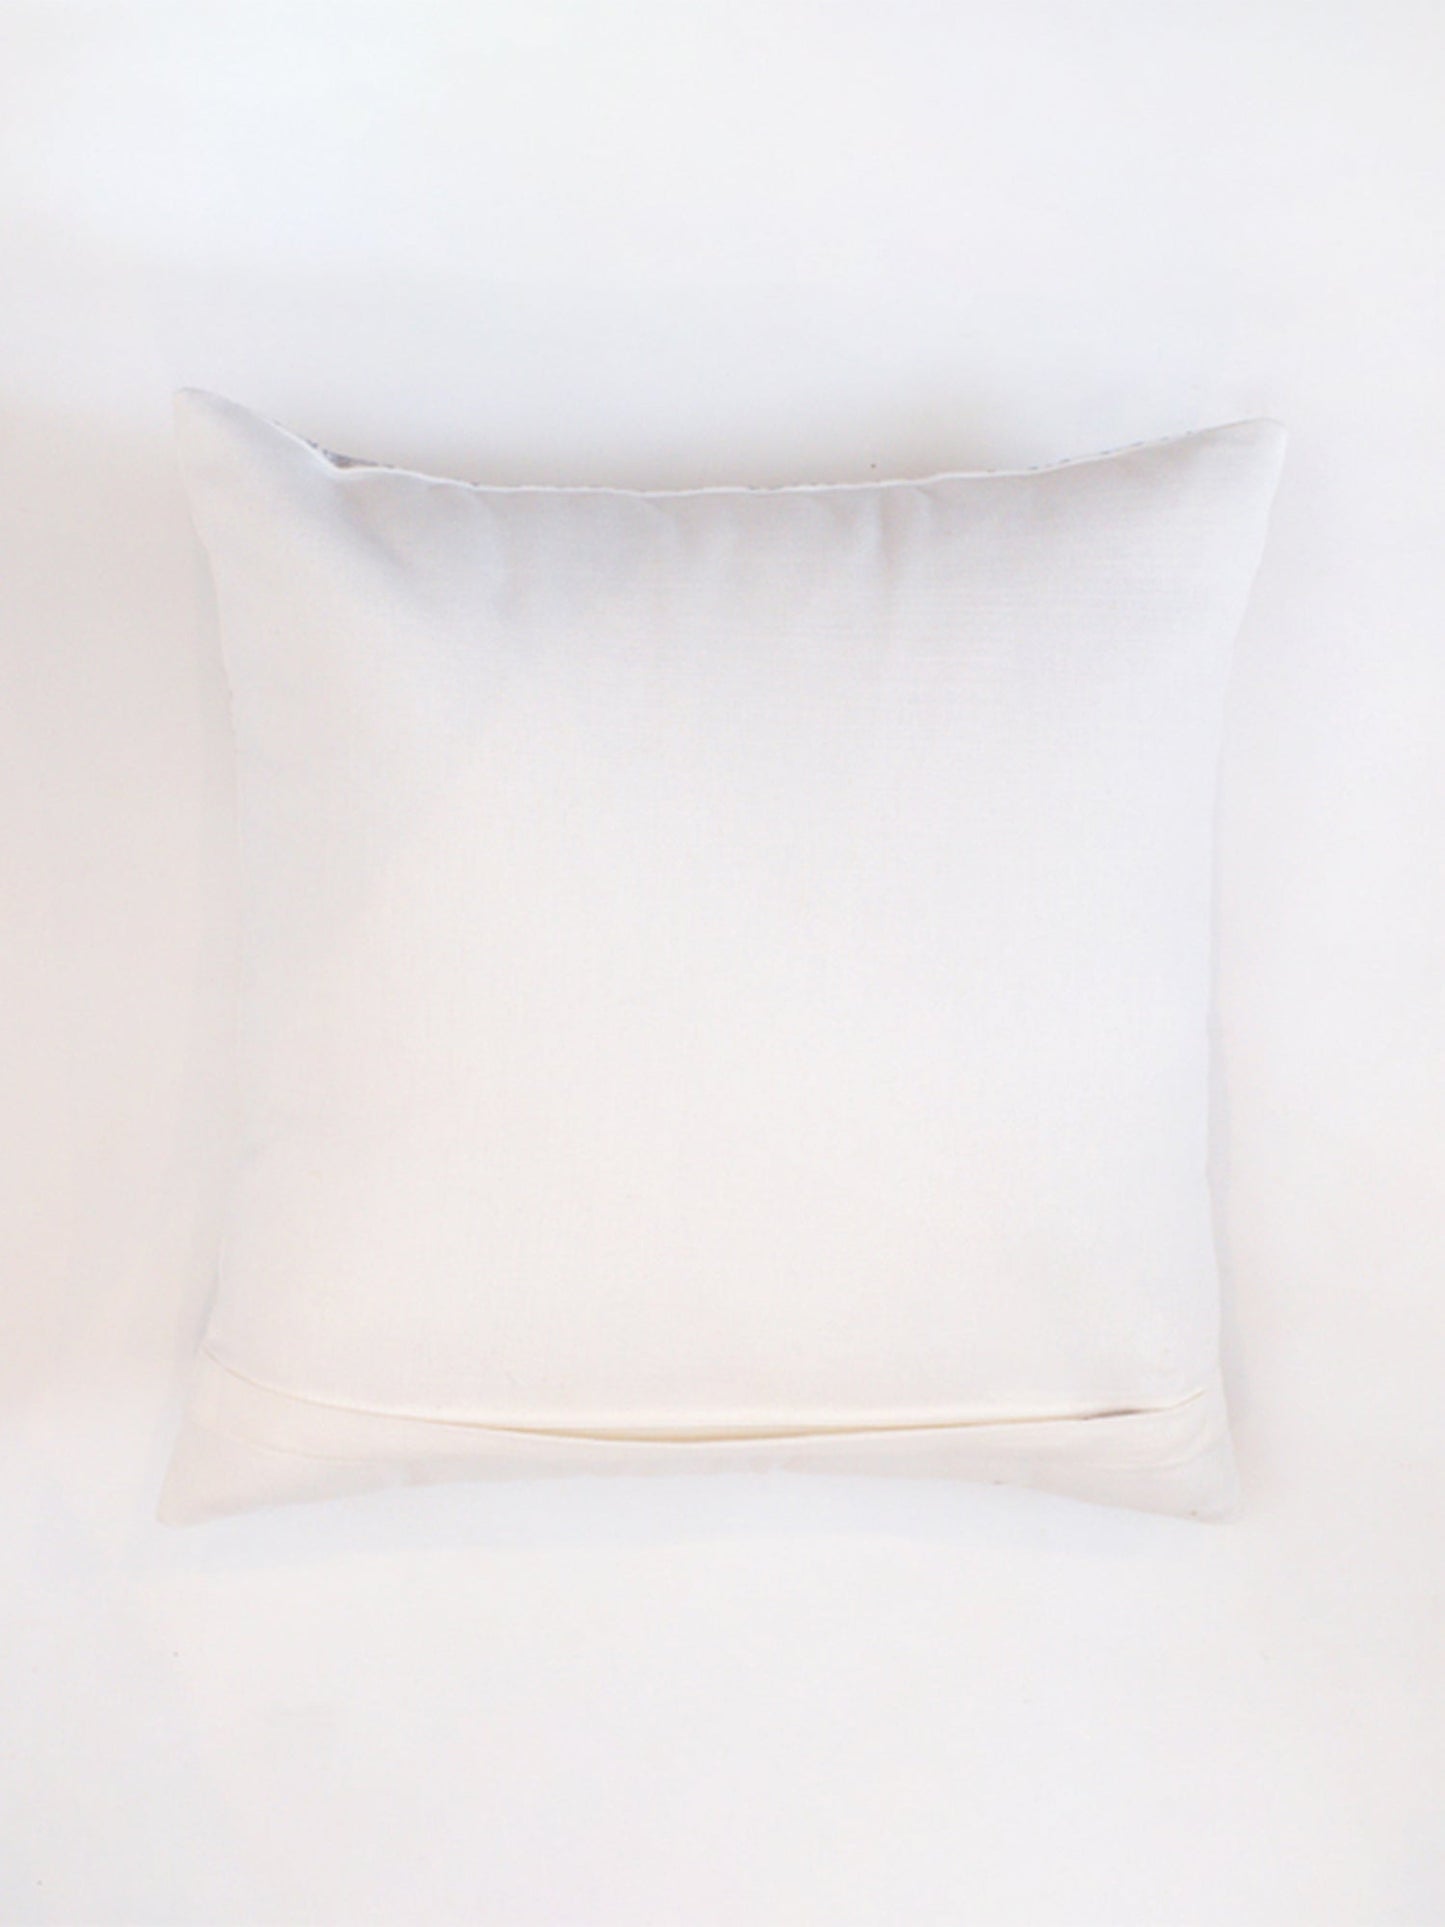 Embroidered Cushion Cover Cotton Linen  Striped White - 16" X 16"